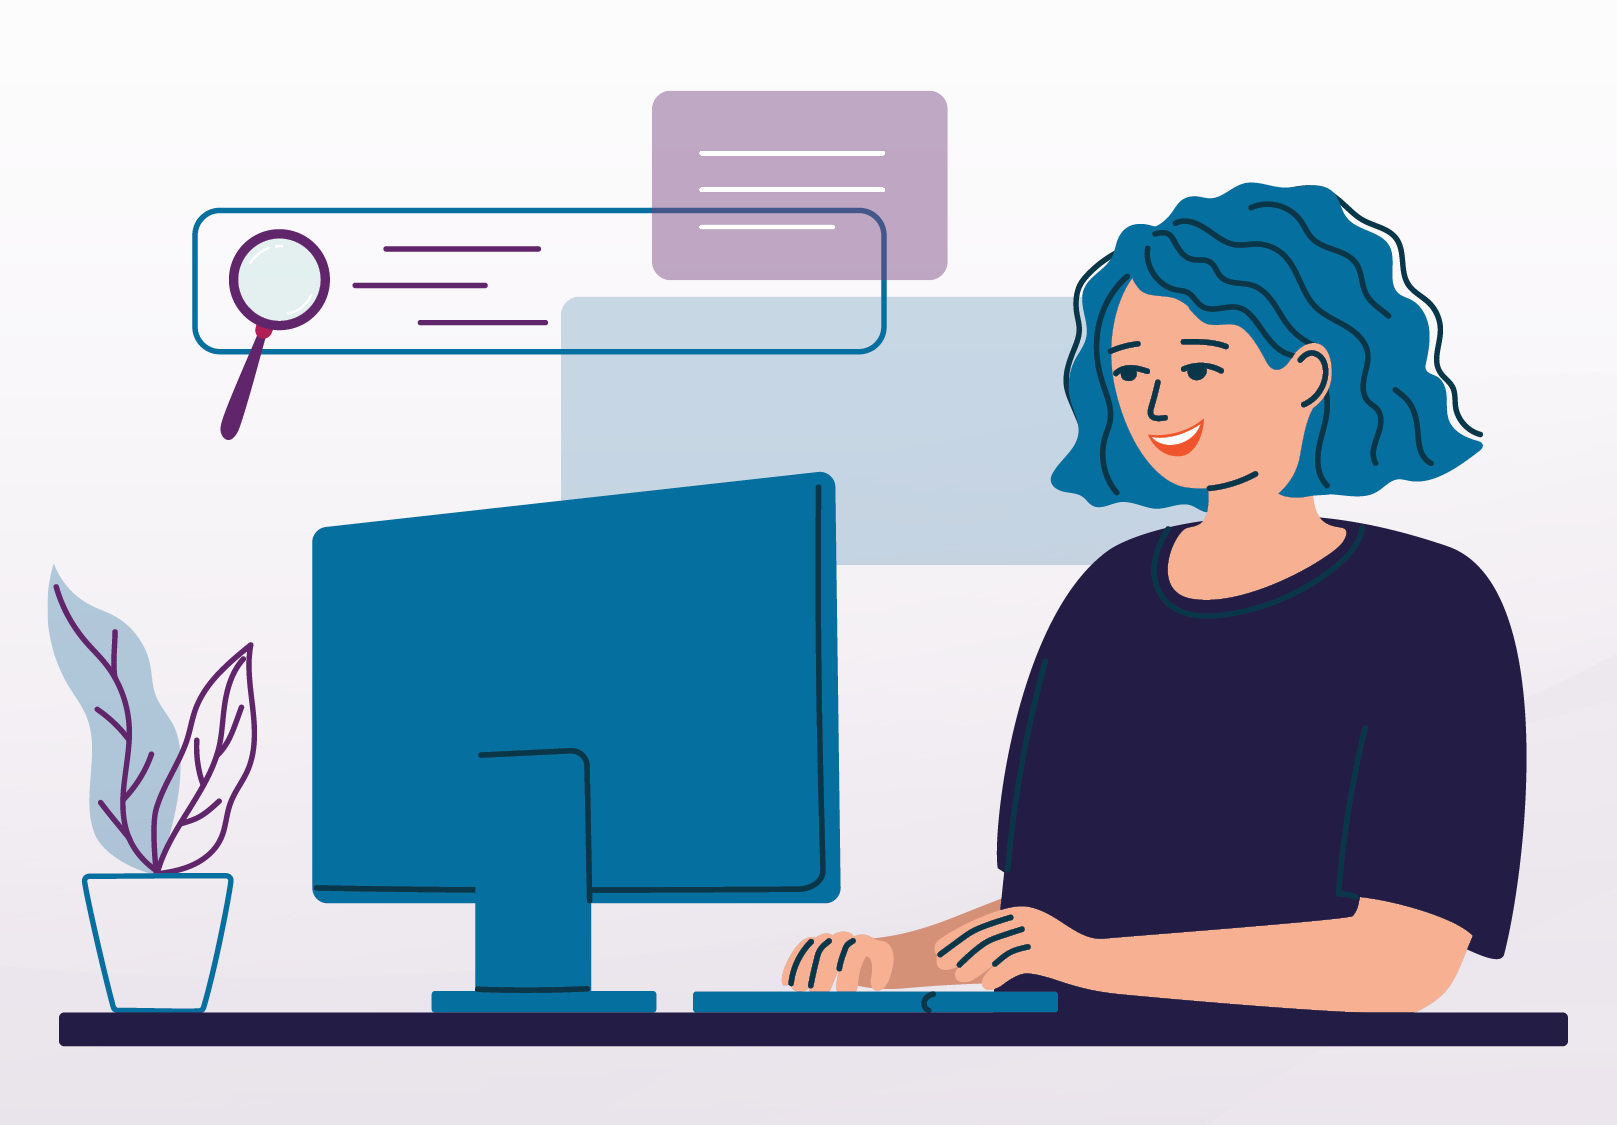 Vector image of a woman sitting at a desk using a computer